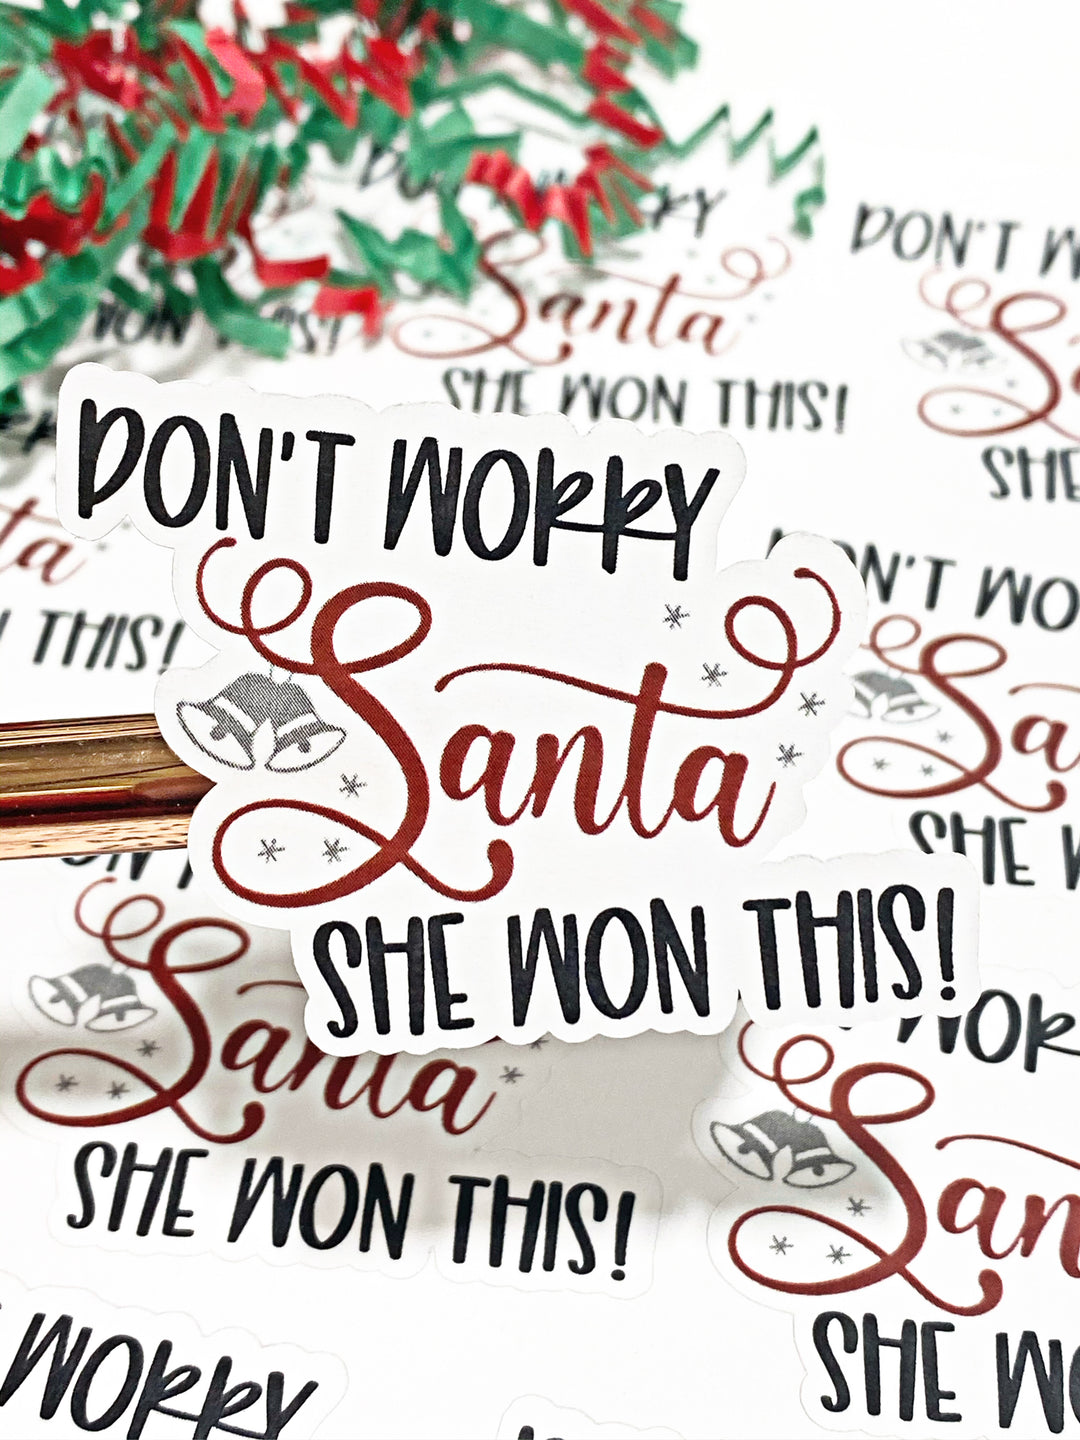 Don't Worry Santa She Won This|  Packaging Stickers | Business Branding | Small Shop Stickers | Sticker #: S0122 | Ready To Ship